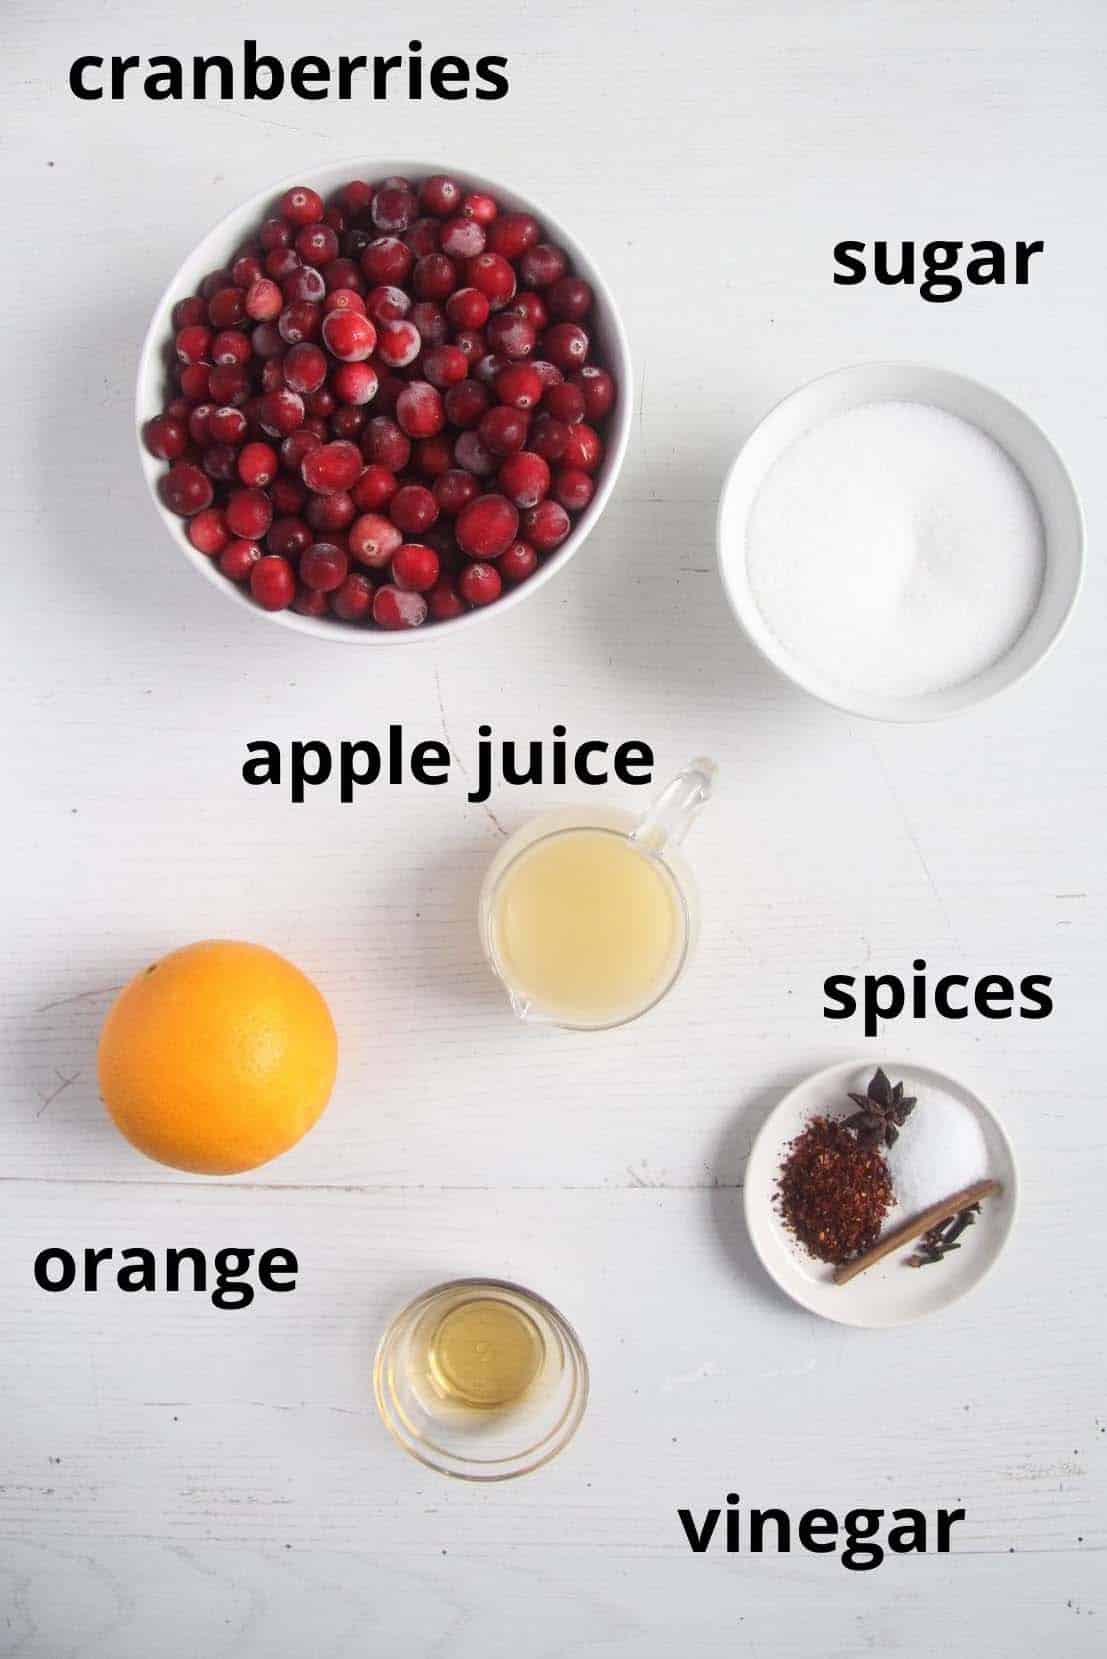 cranberries, sugar, apple juice, orange, spices and vinegar in bowls on the table.